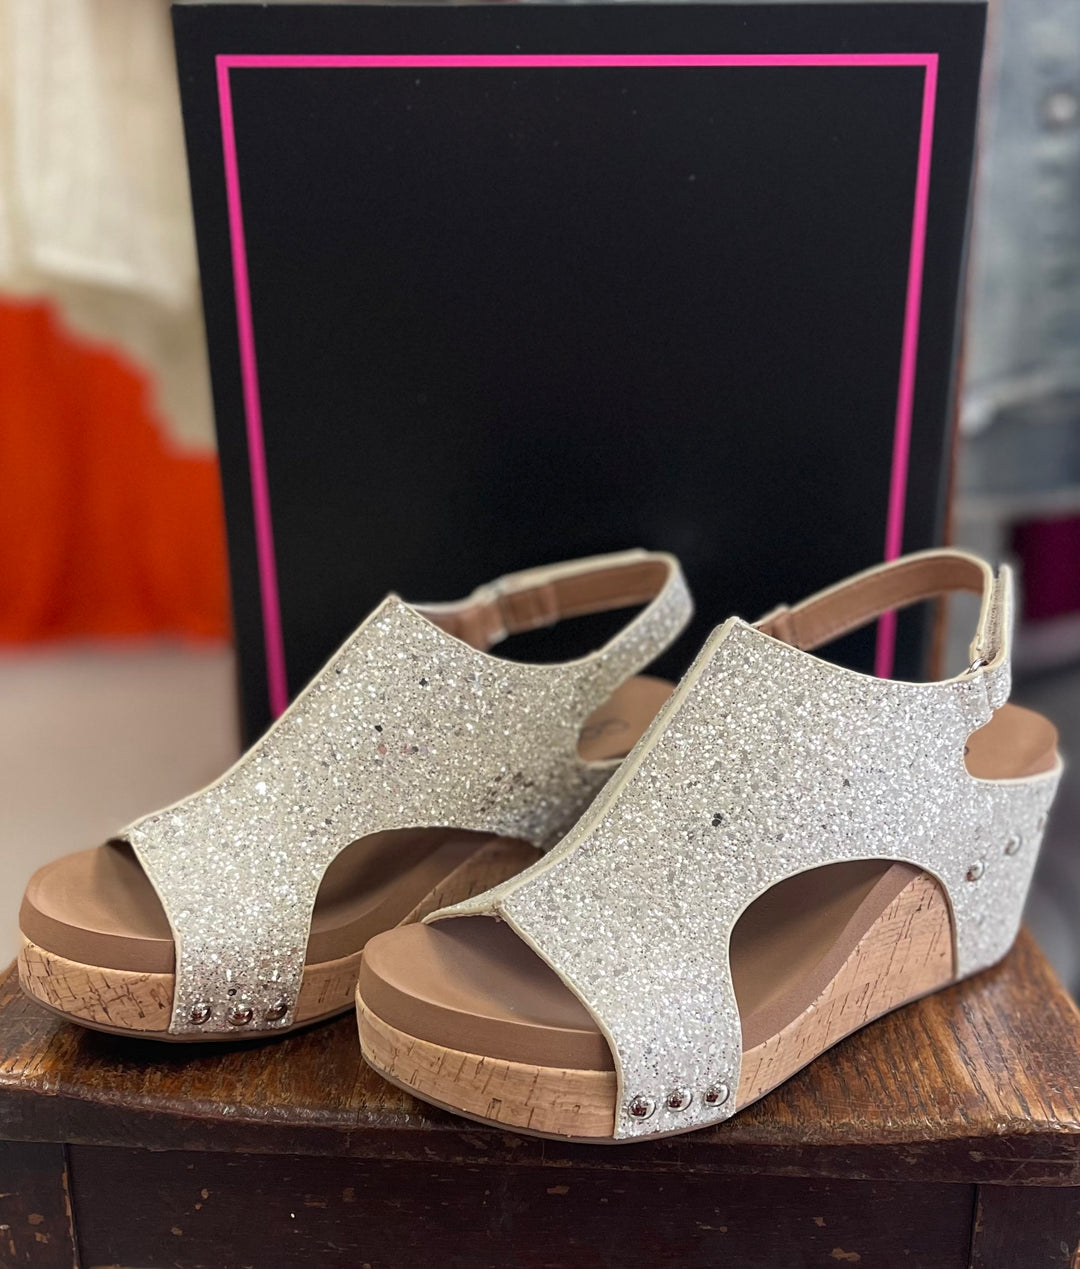 Silver Glitter Carley wedges by Corkys